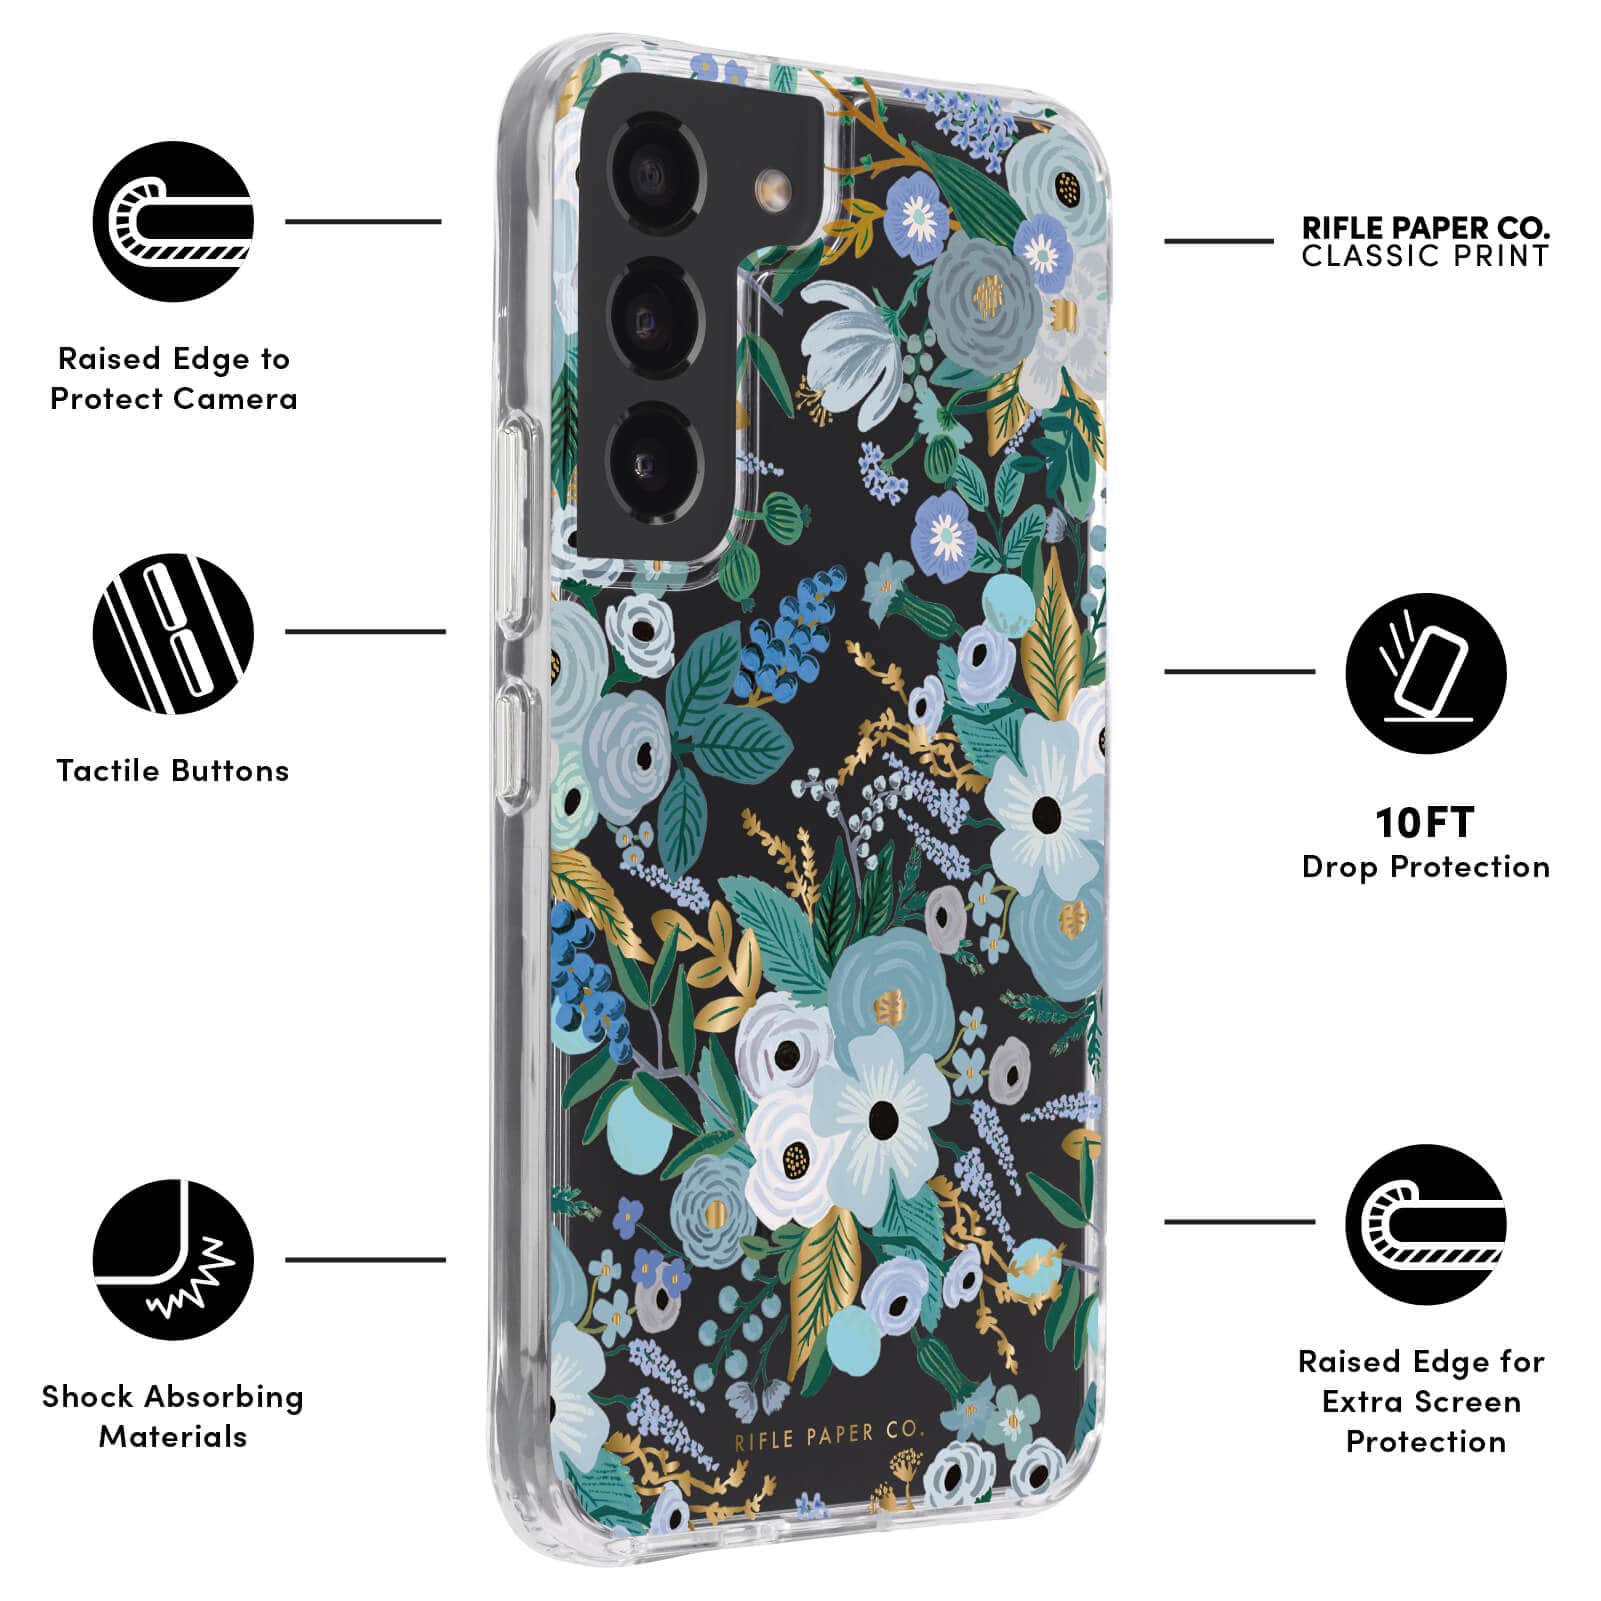 FEATURES: RASIED EDGE TO PROTECT CAMERA, TACTILE BUTTONS, SHOCK ABSORBING MATERIALS, RIFLE PAPER CO. CLASSIC PRINT, 10FT DROP PROTECTION, RAISED EDGE FOR EXTRA SCREEN PROTECTION. COLOR::GARDEN PARTY BLUE